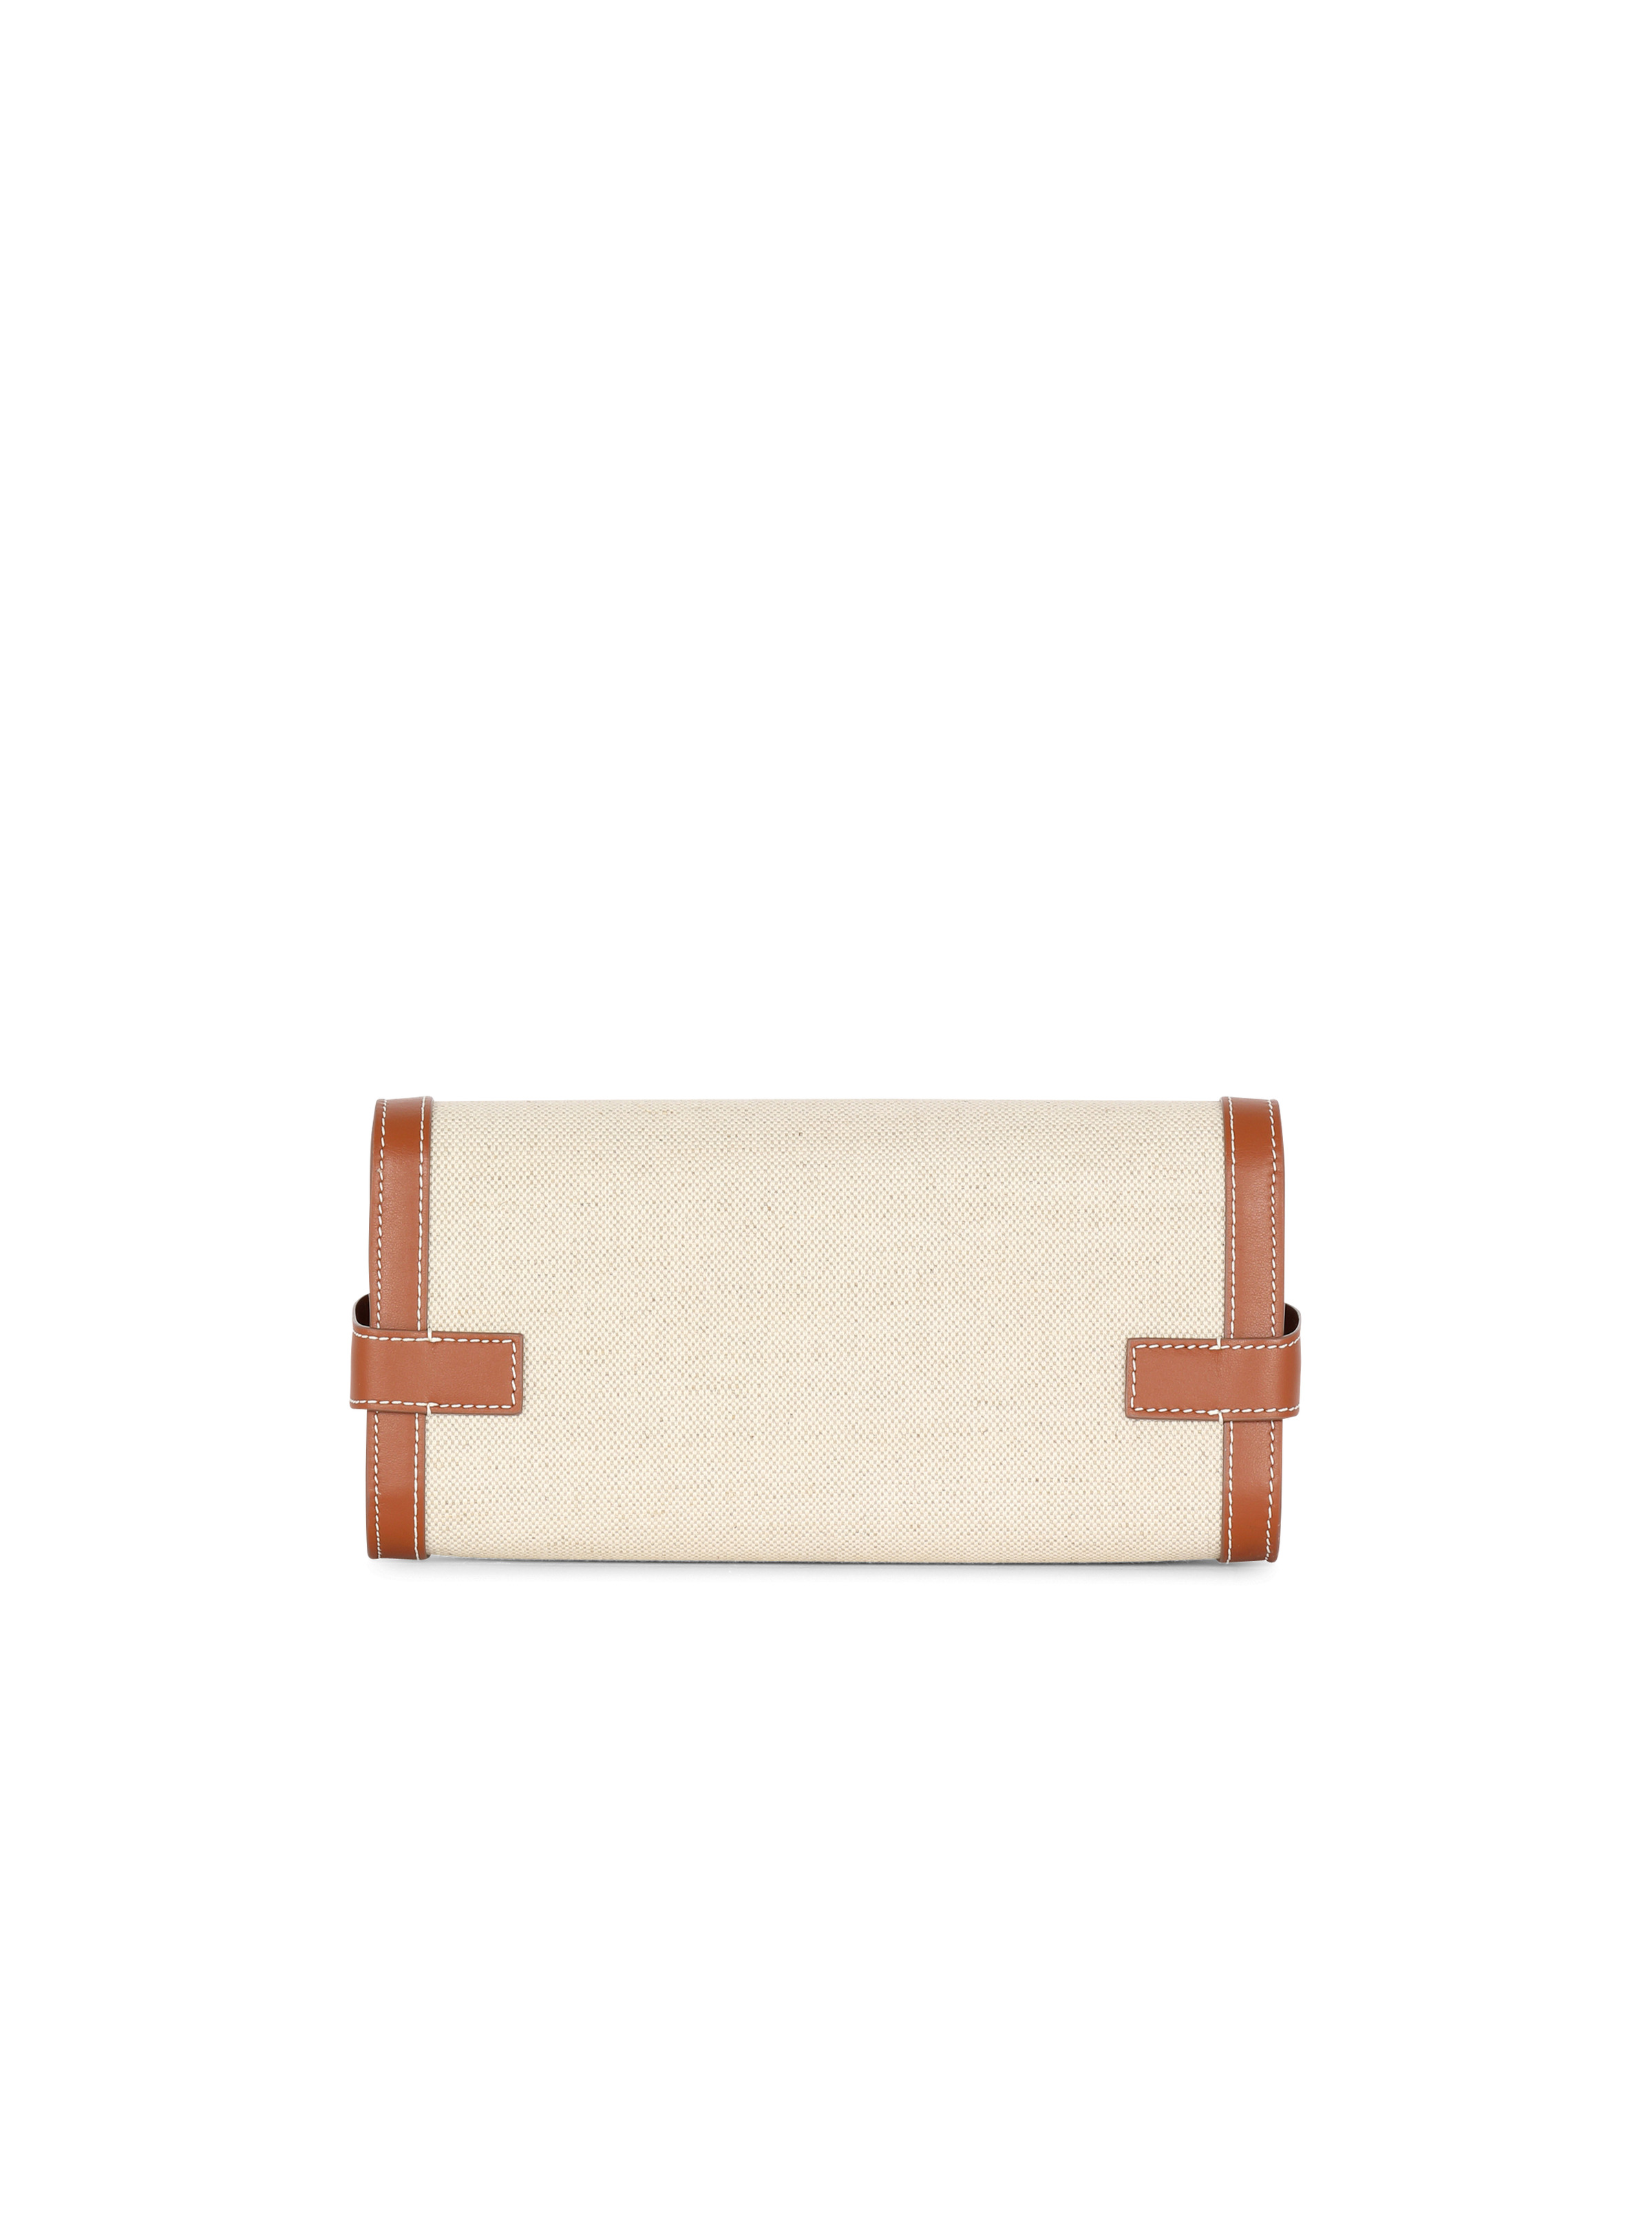 B-Buzz 23 leather and canvas clutch bag - 3